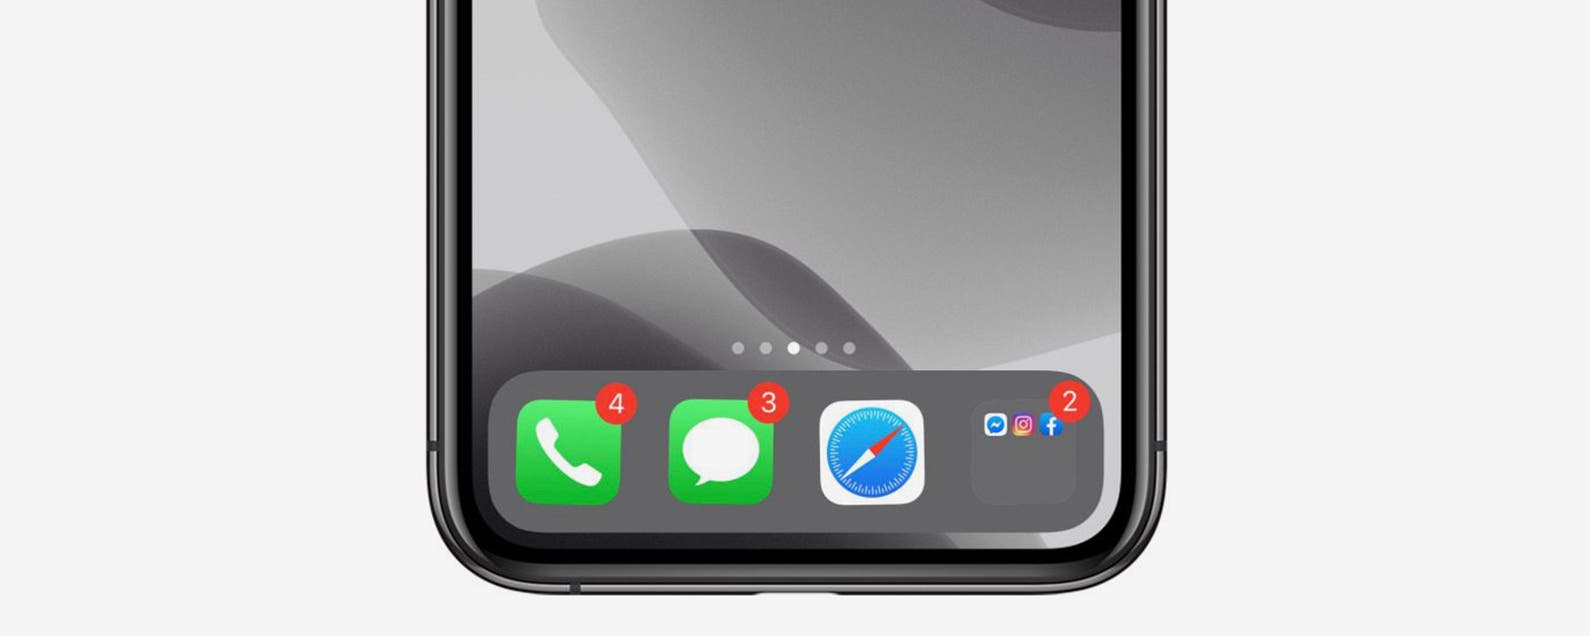 How to Add More than 4 Apps to the iPhone Dock by Using Folders